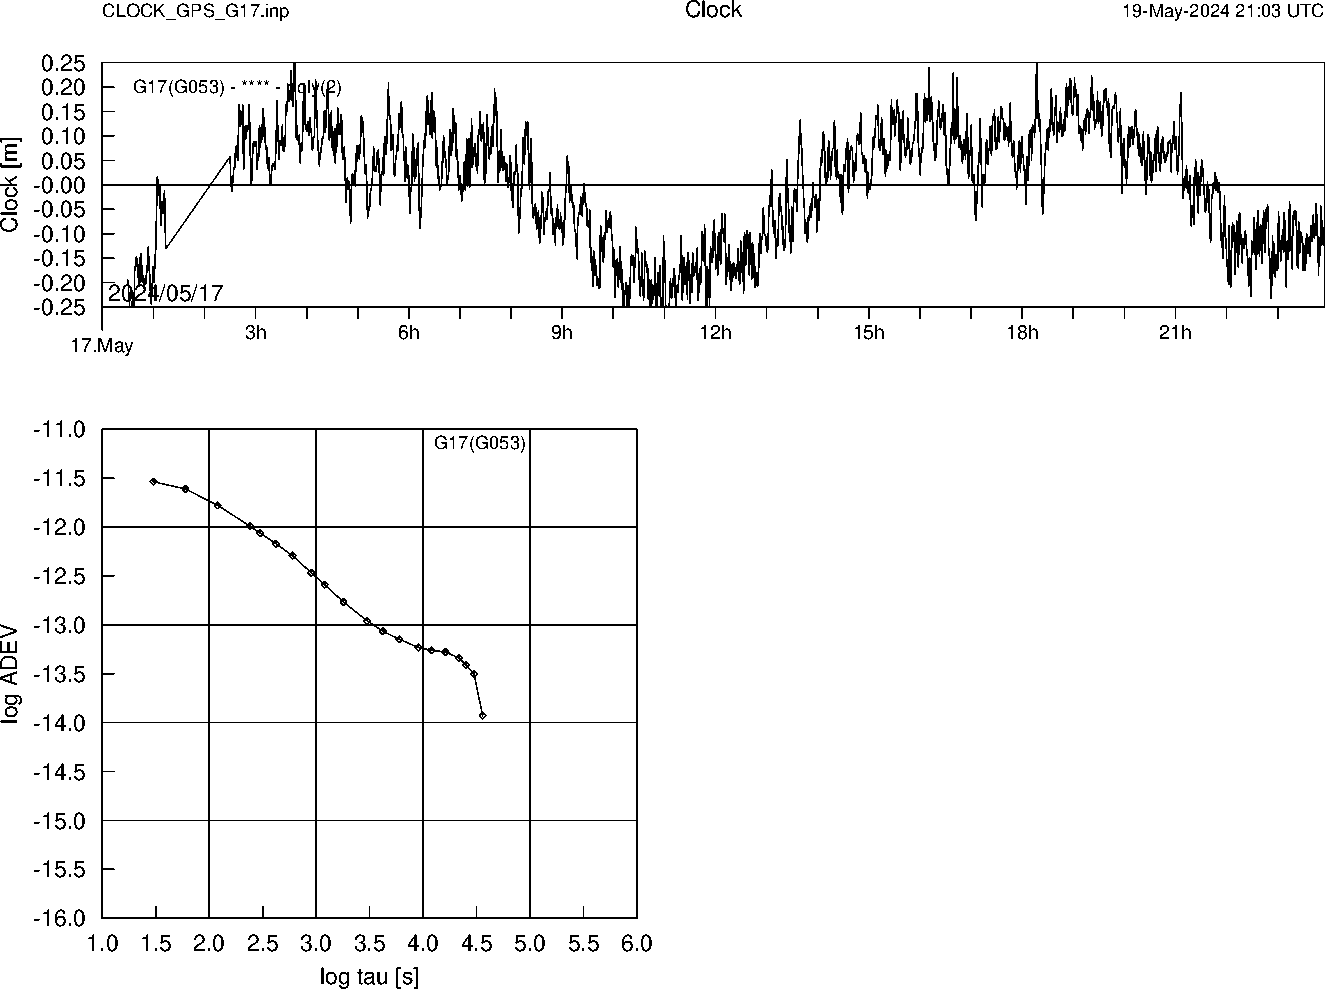 GPS G17 Clock Time Series and Allan Deviation